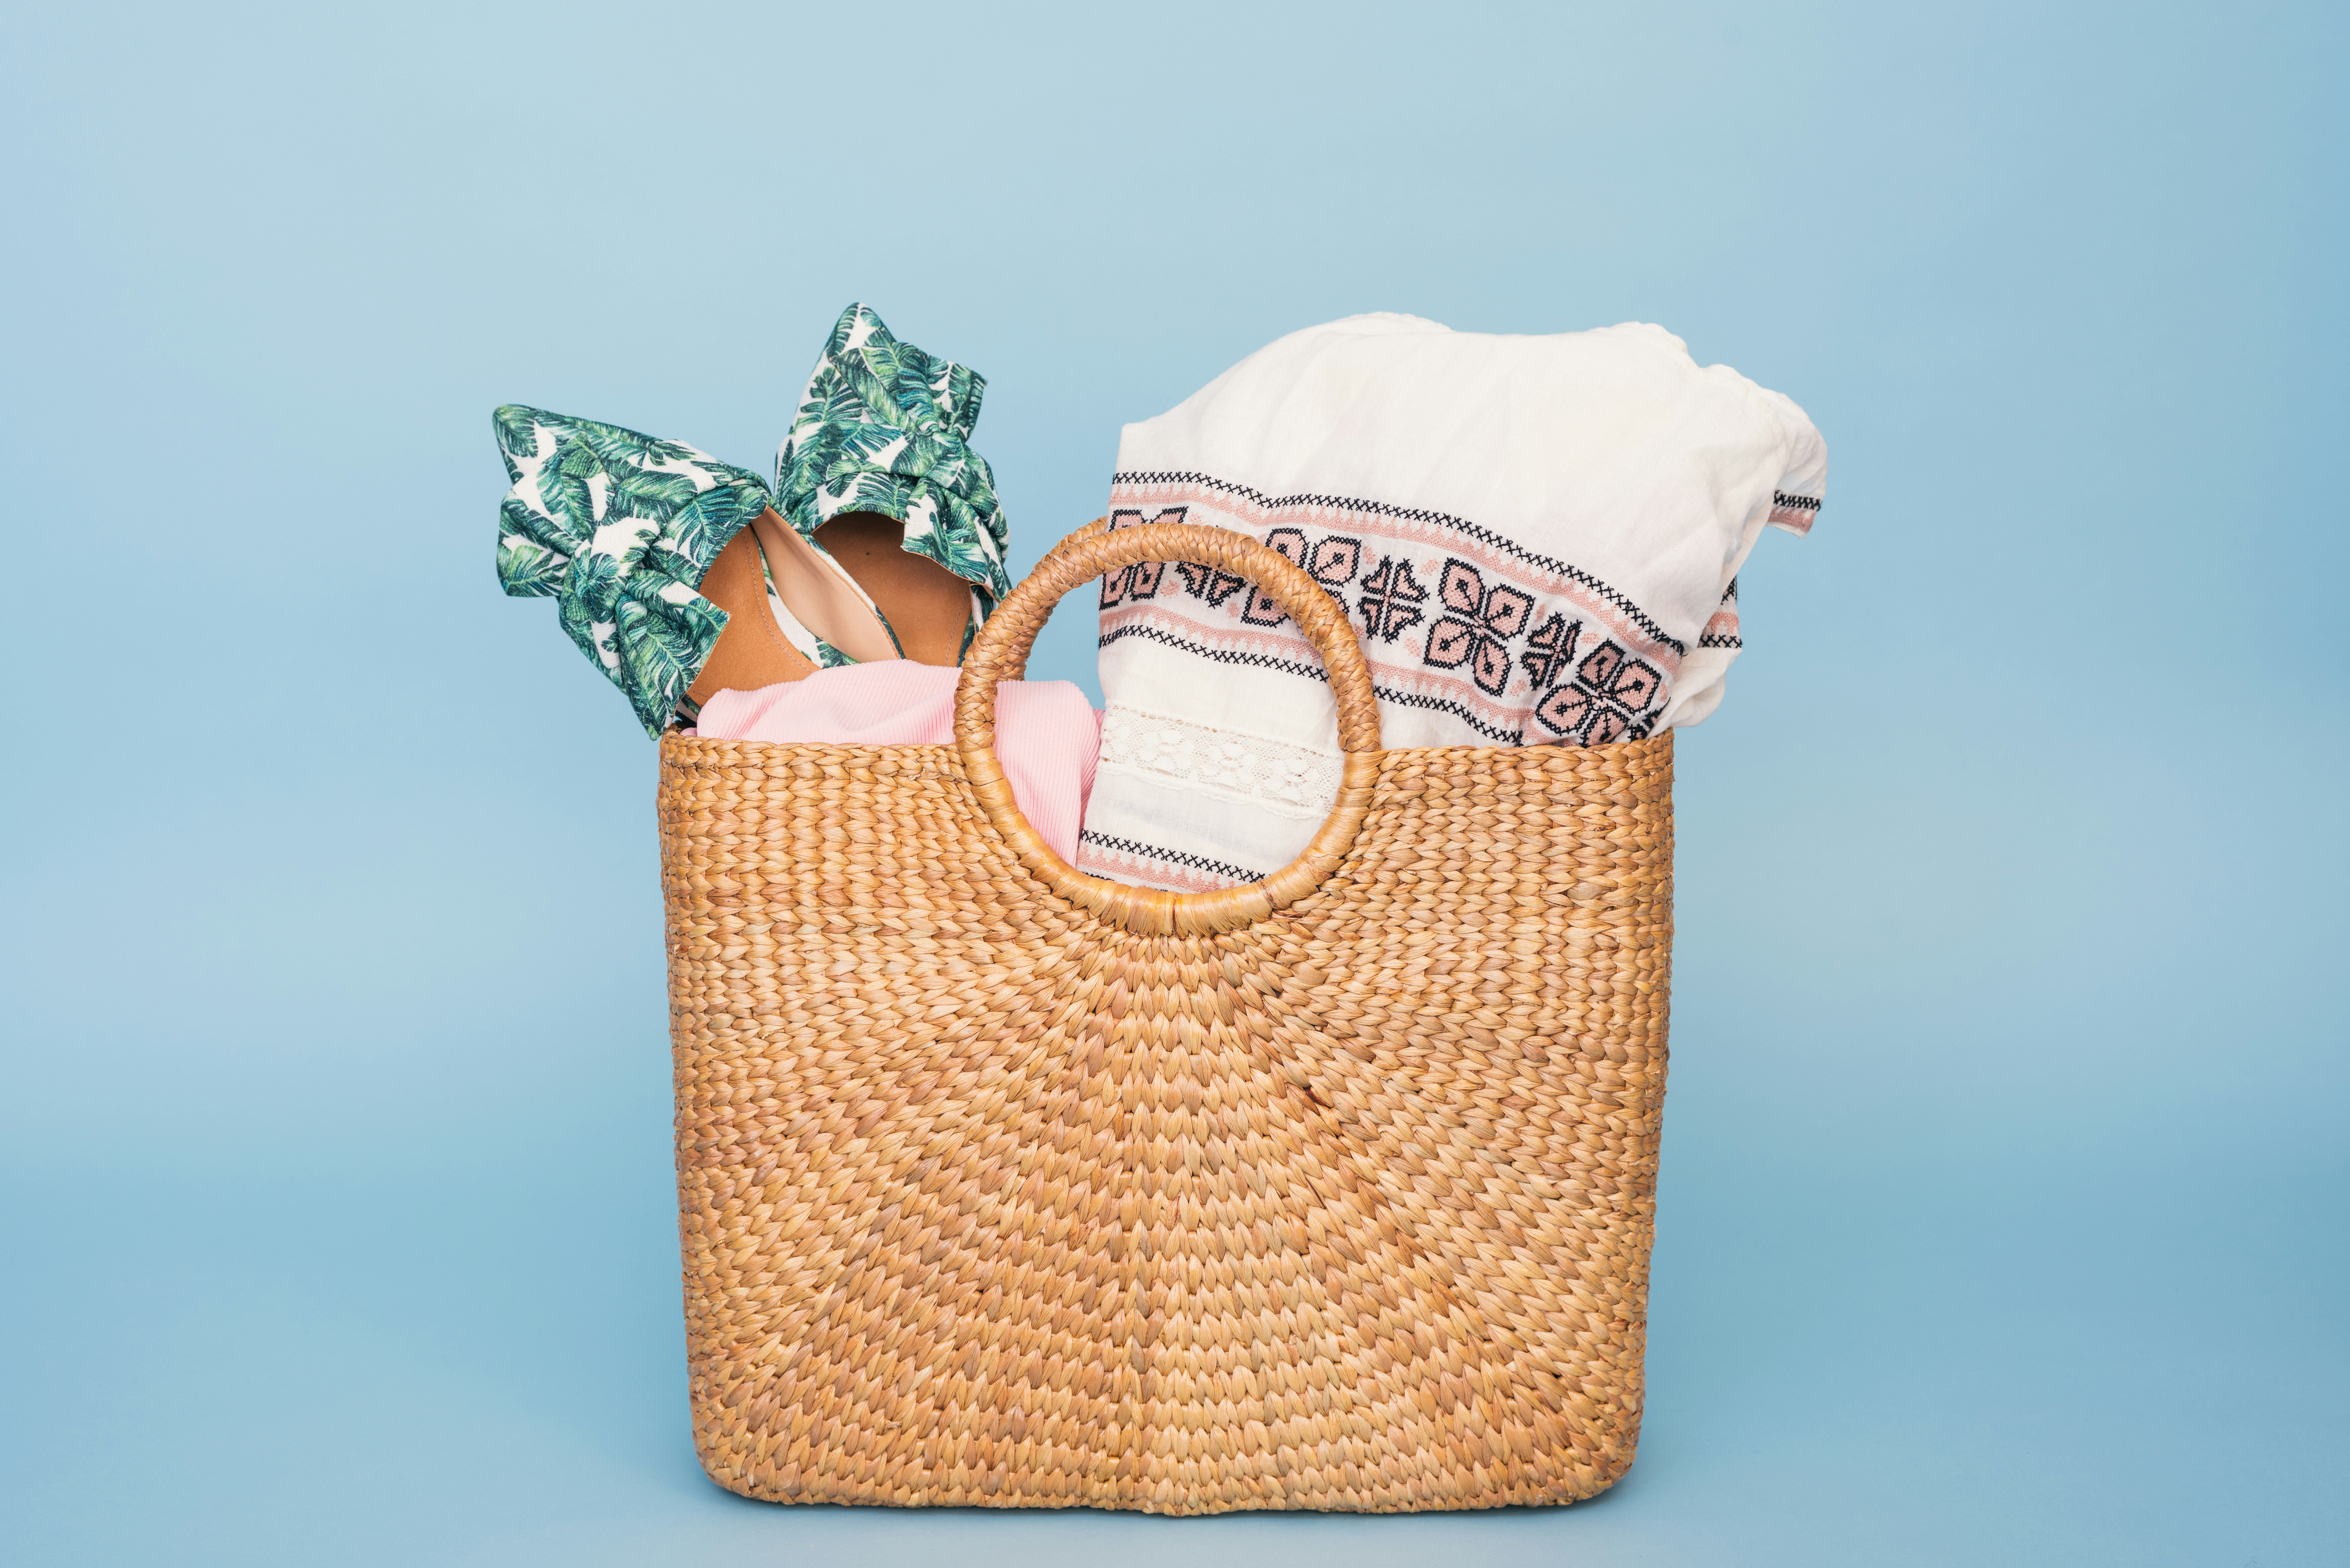 Sturdy Cotton bags